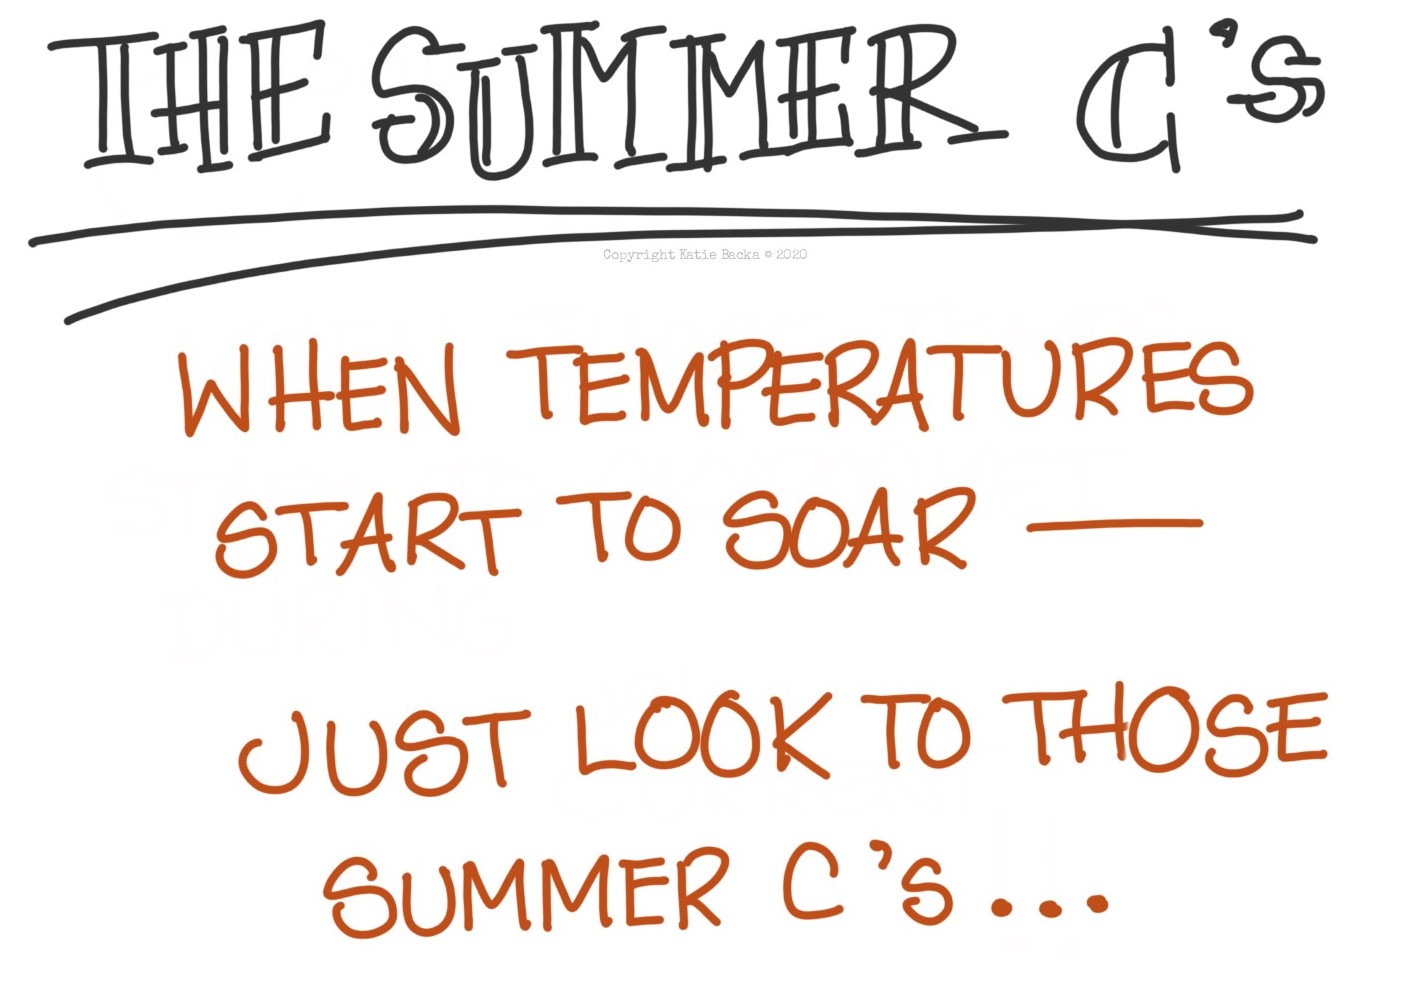 text: The Summer C's, when temperatures start to soar - just look to those summer C's